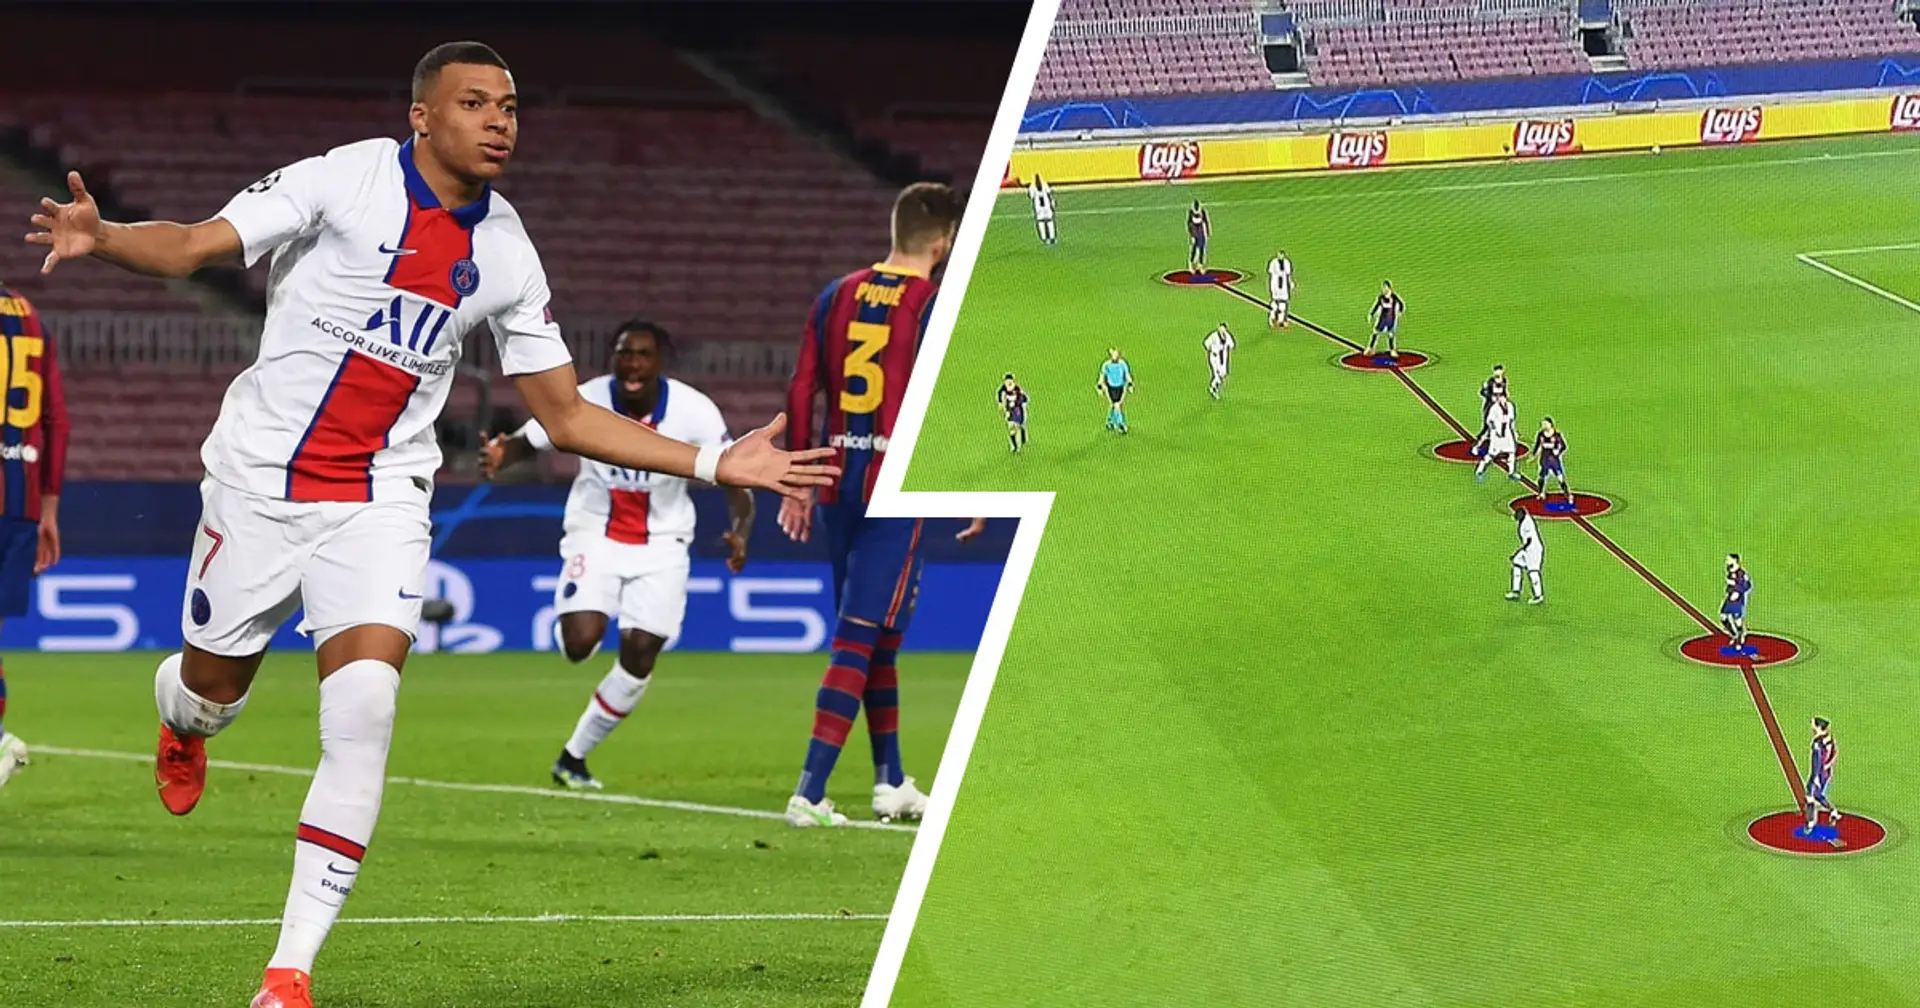 ‘What the hell is that?’: Barcelona ridiculed for shocking set-up before Mbappe’s second goal